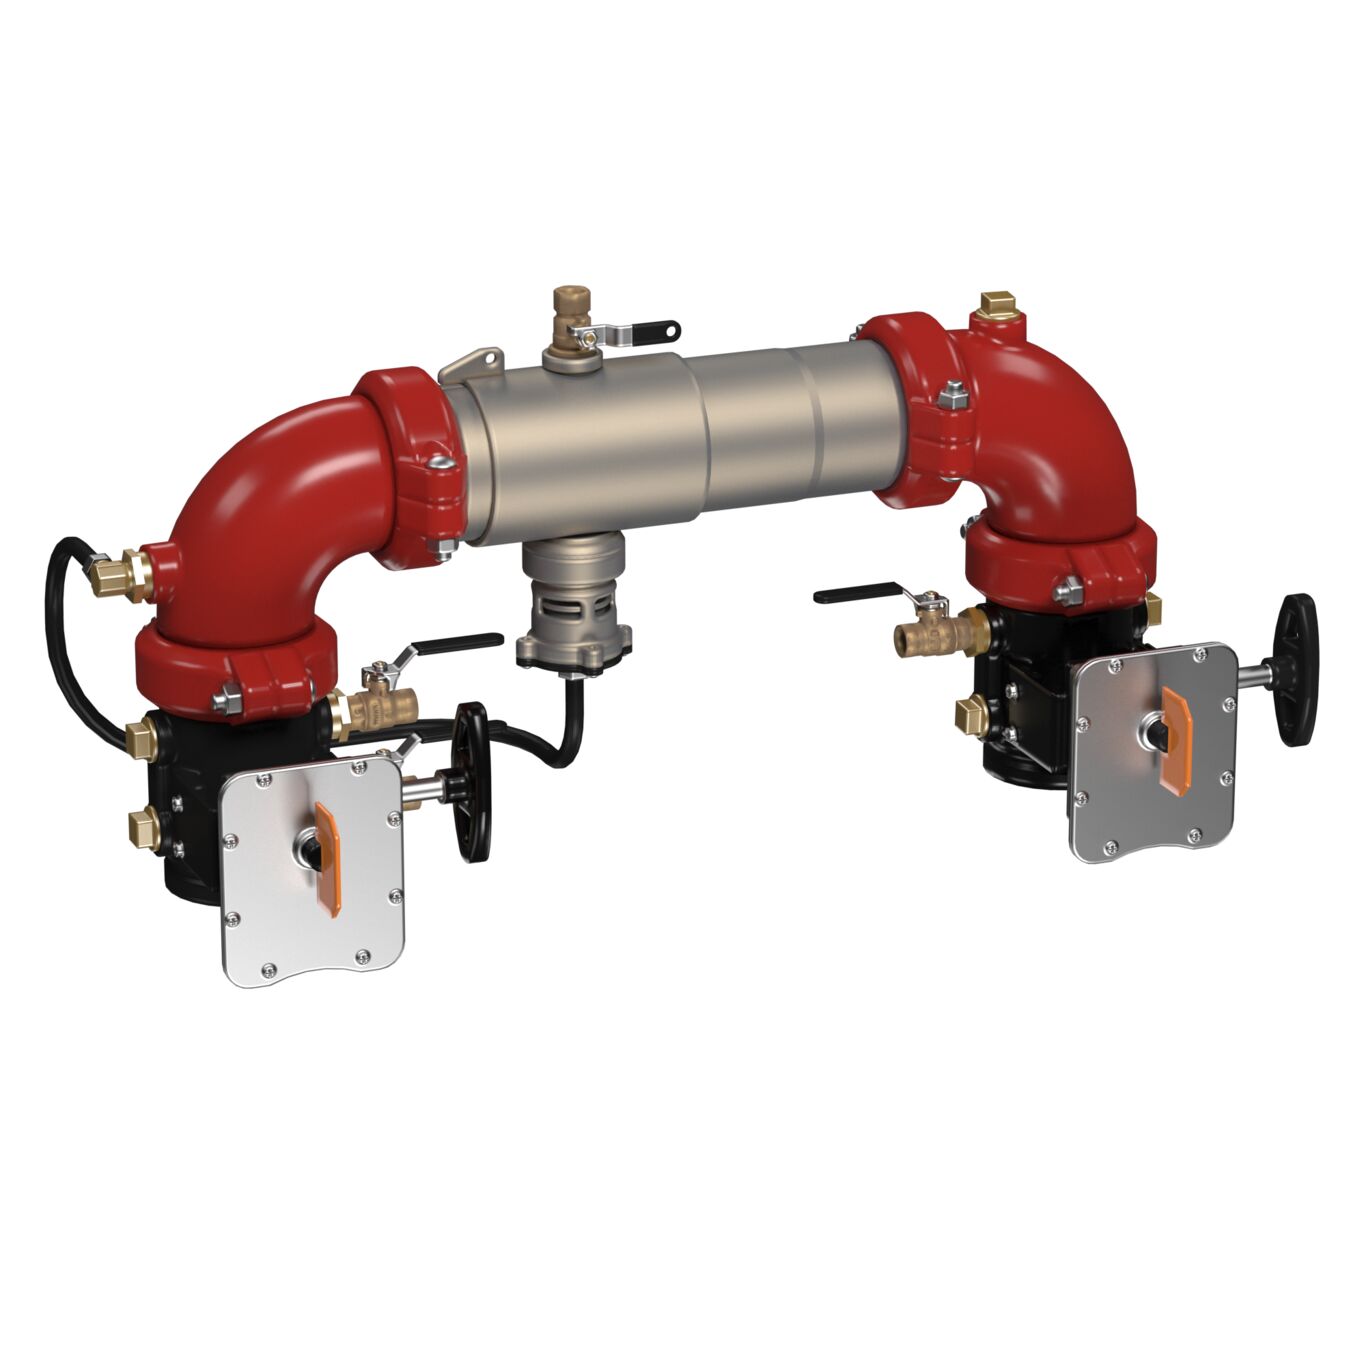 Stainless Steel Reduced Pressure Zone Backflow Preventer Assembly, Colt, Grooved Gear Butterfly Shutoff Valves, Link Check Modules, N Pattern